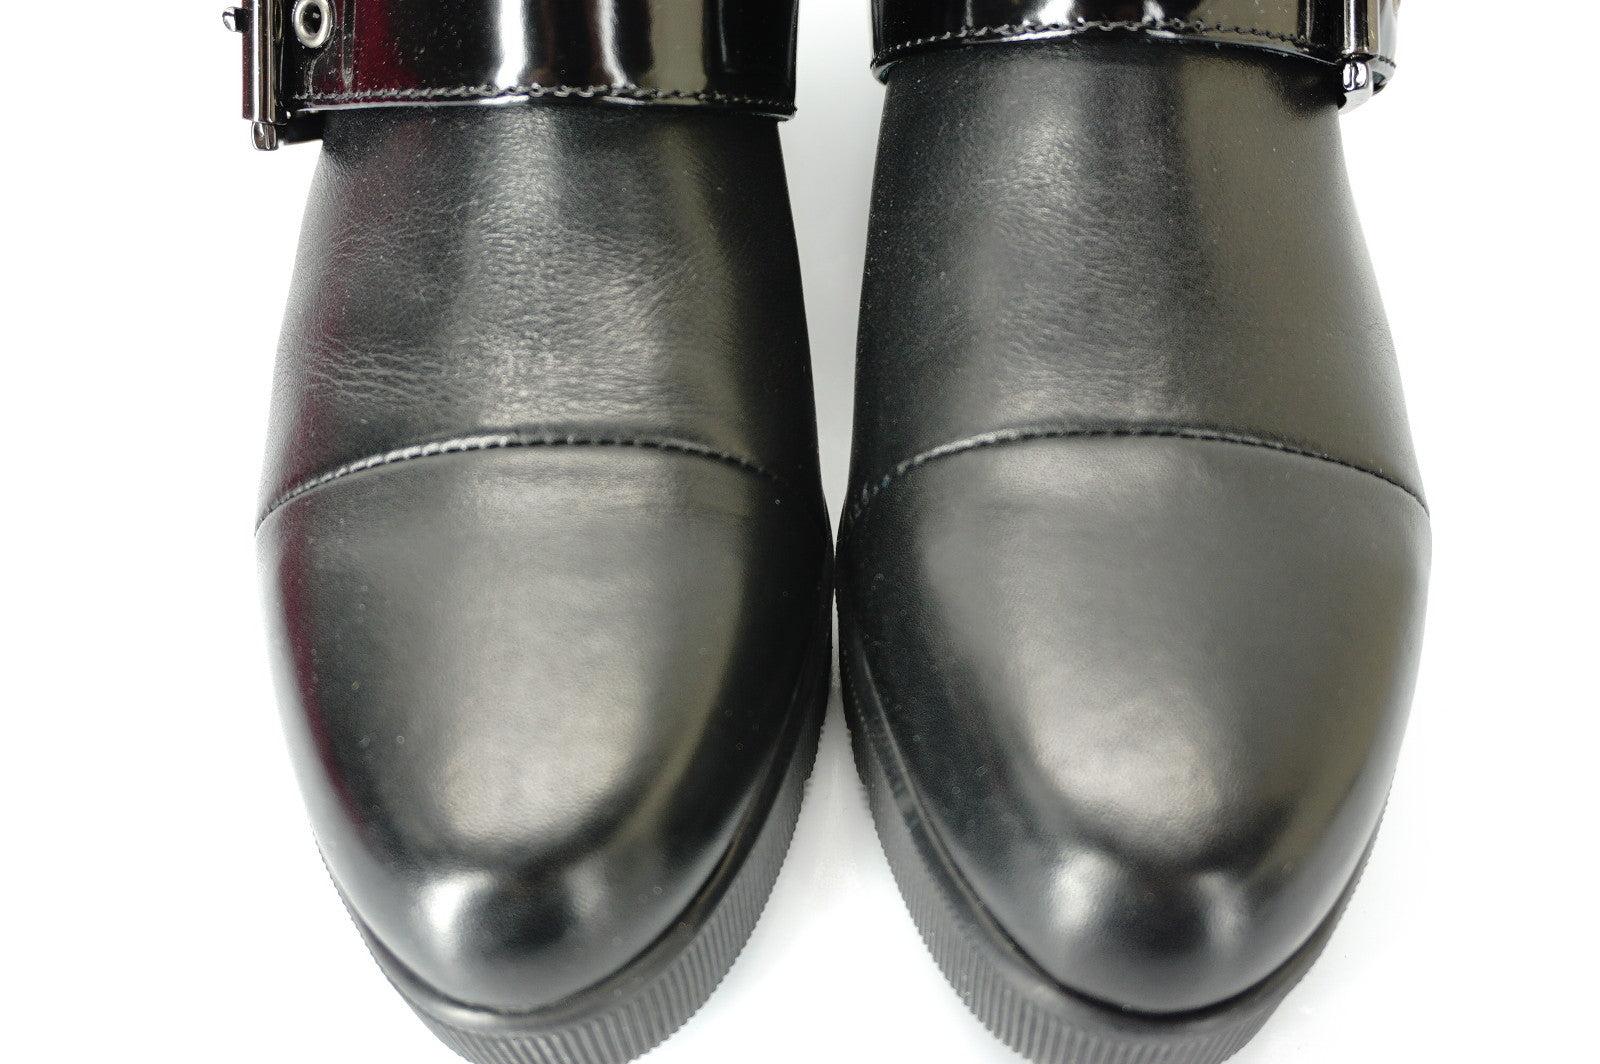 Aquatalia by Marvin K Black Leather Chelsea Stretch Ankle Boots SZ 6.5 $475 NIB